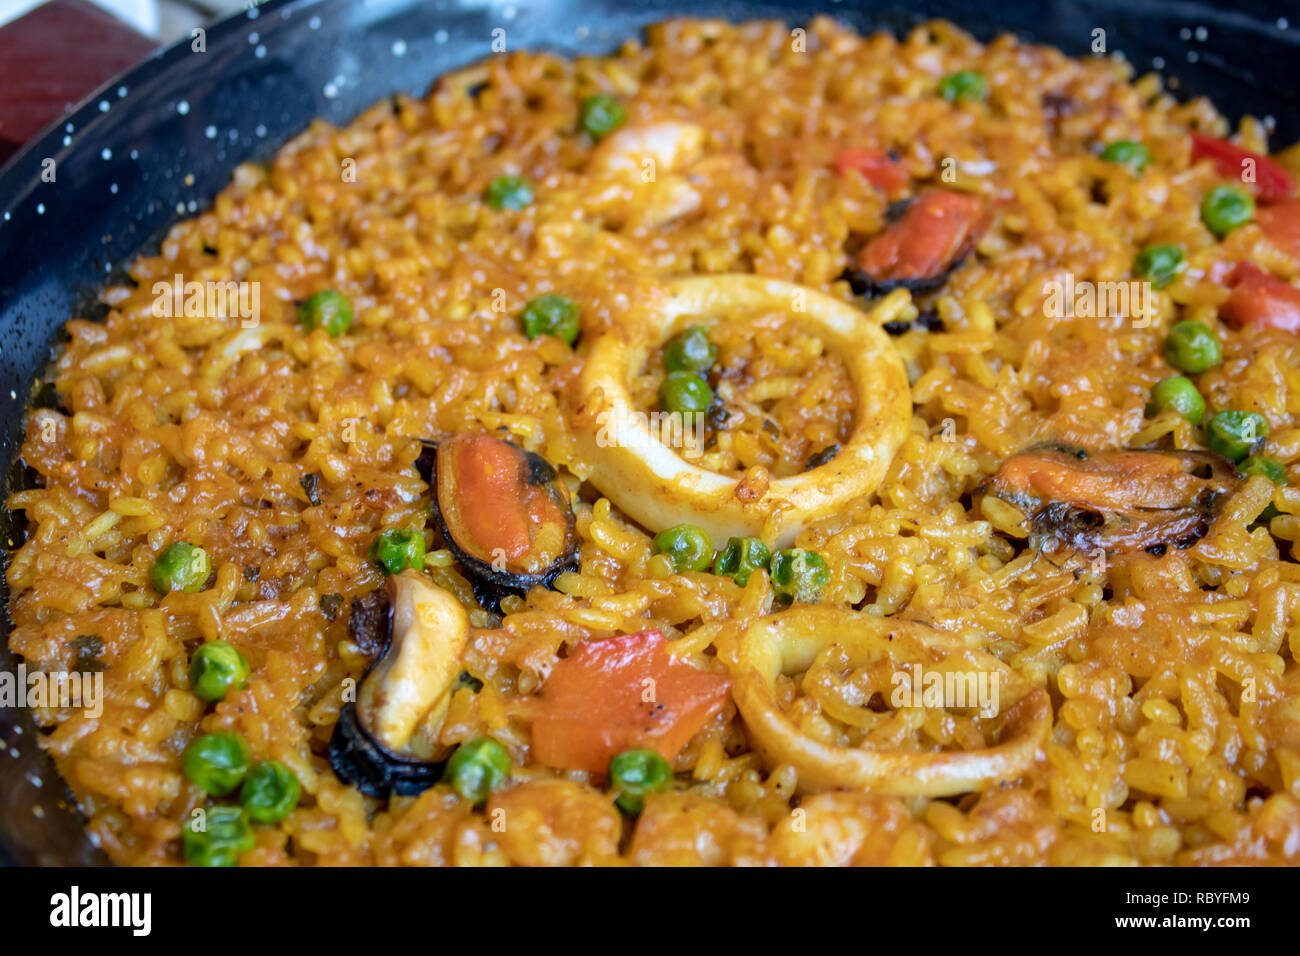 Fresh Spanish paella with rice and seafood in frying pan closeup Stock Photo